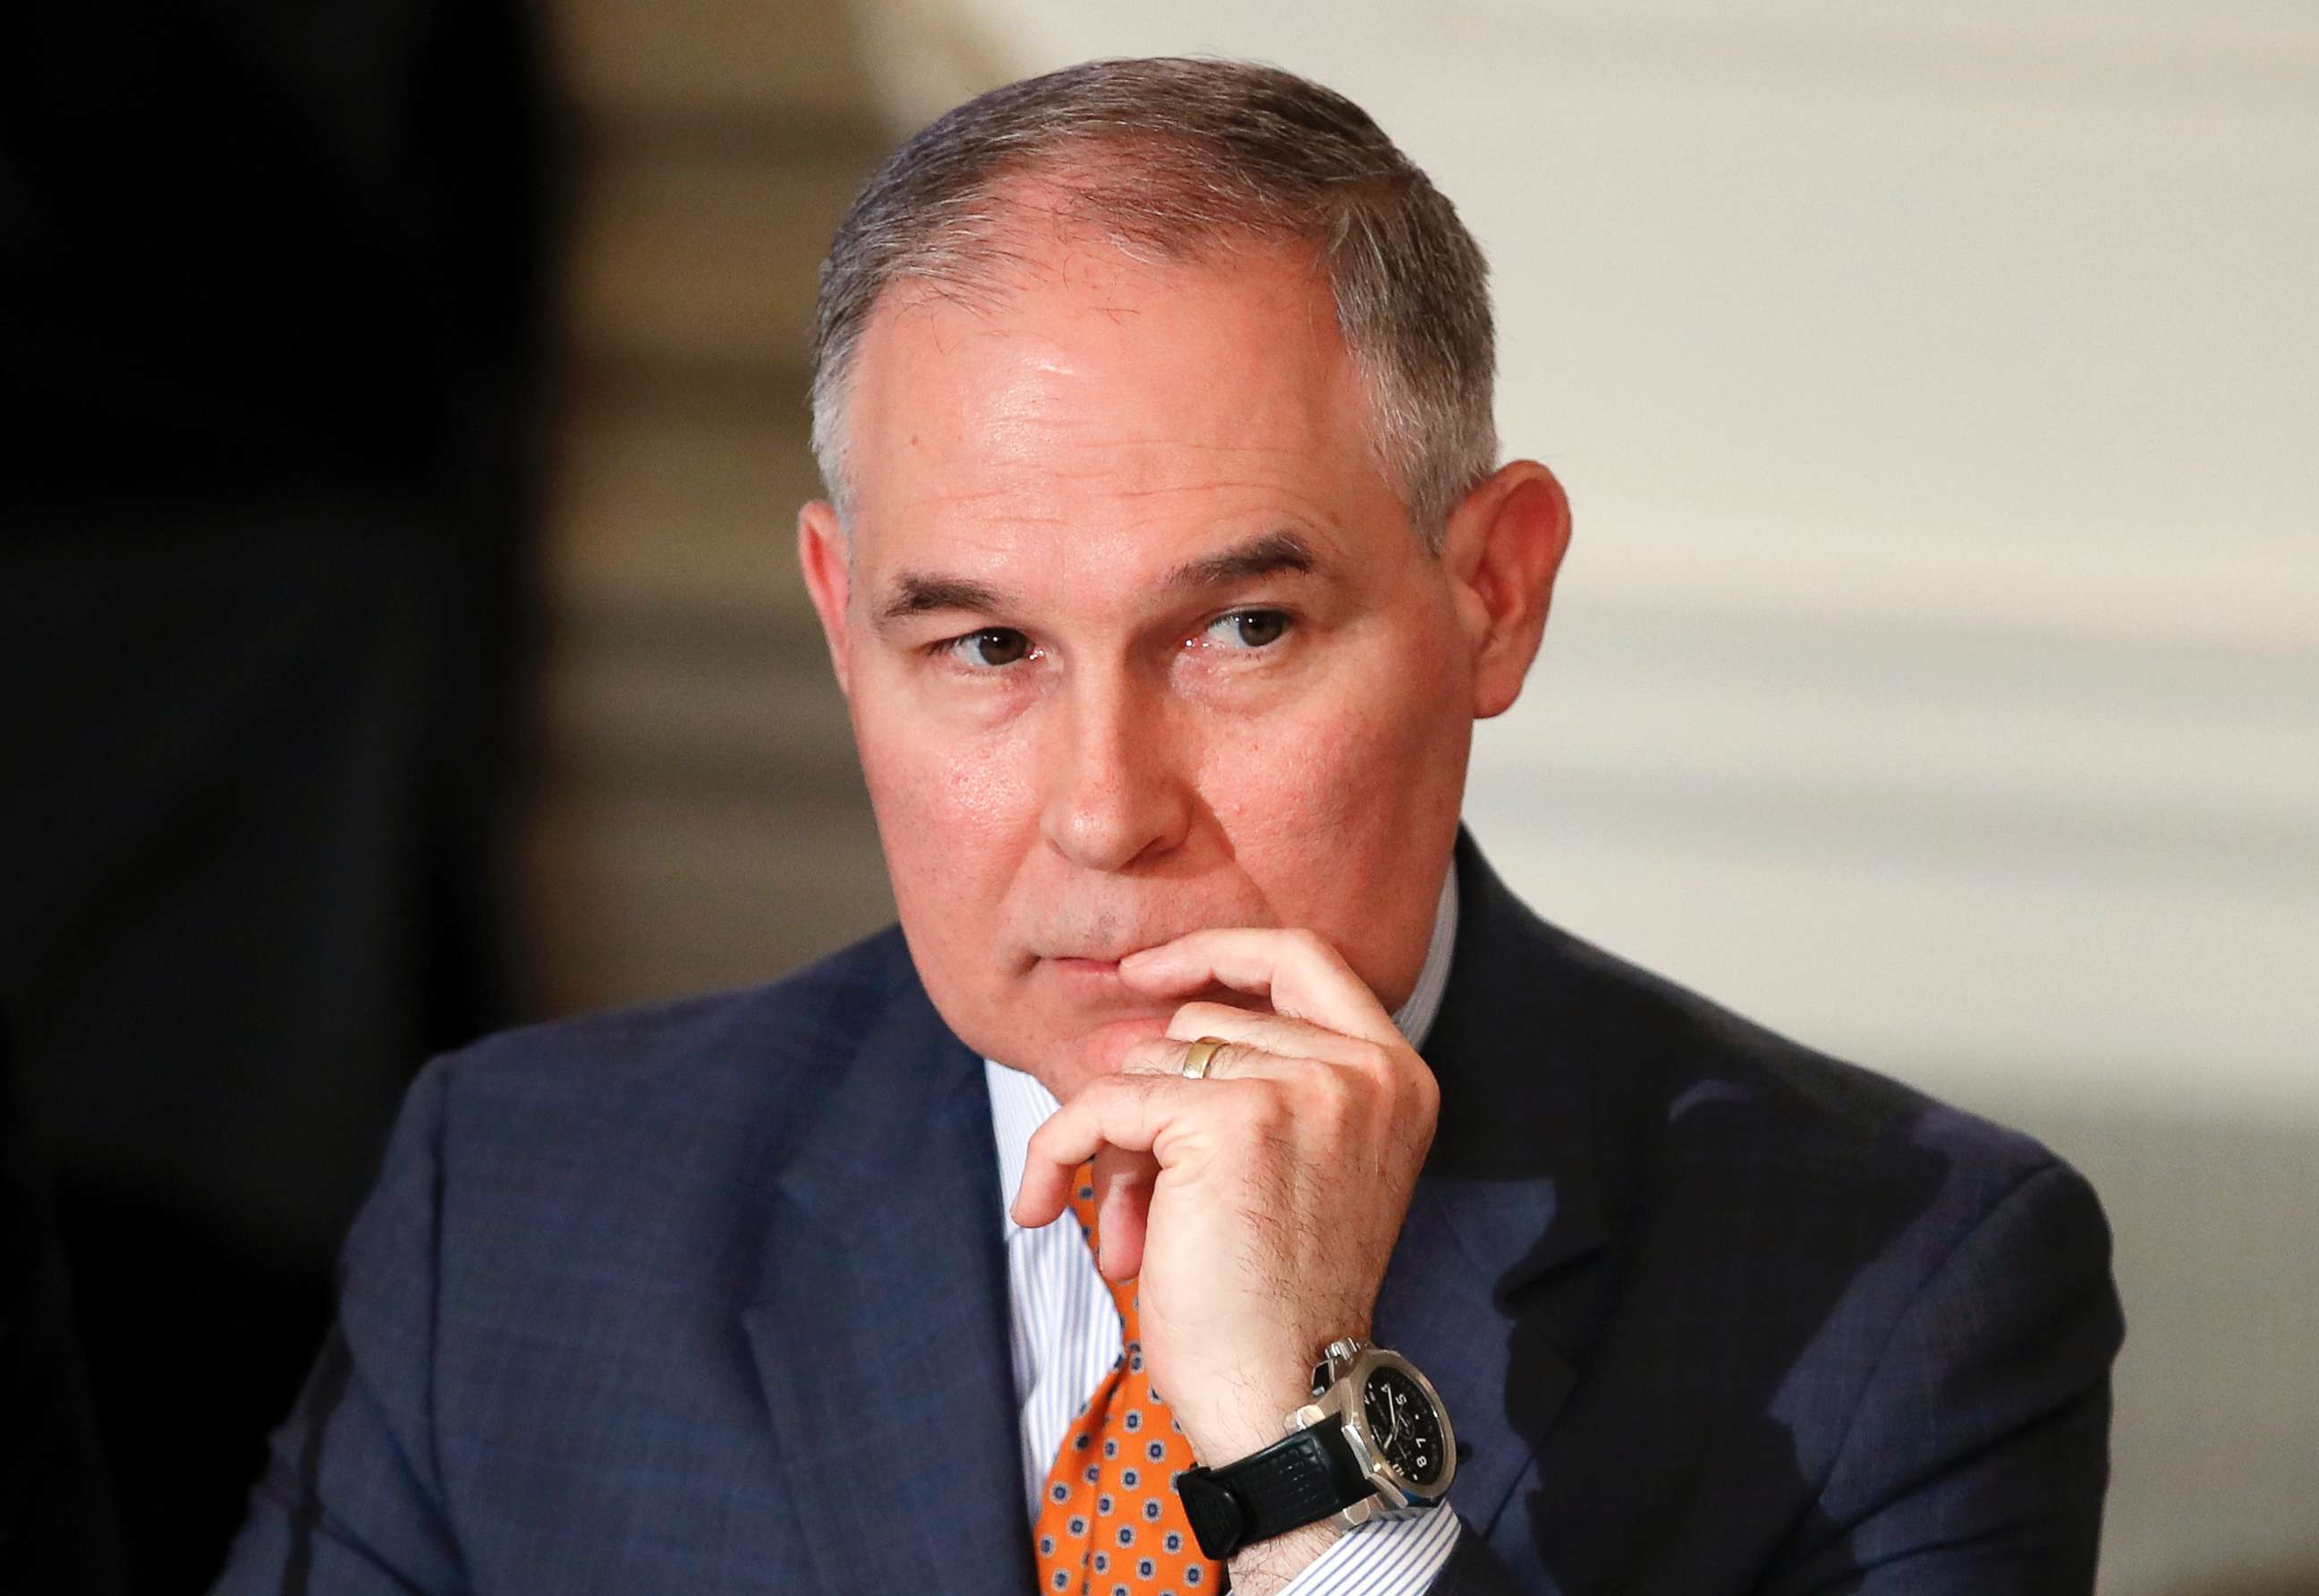 PHOTO: Environmental Protection Agency Administrator Scott Pruitt attends a meeting with state and local officials in the State Dining Room of the White House in Washington, D.C., Feb. 12, 2018.